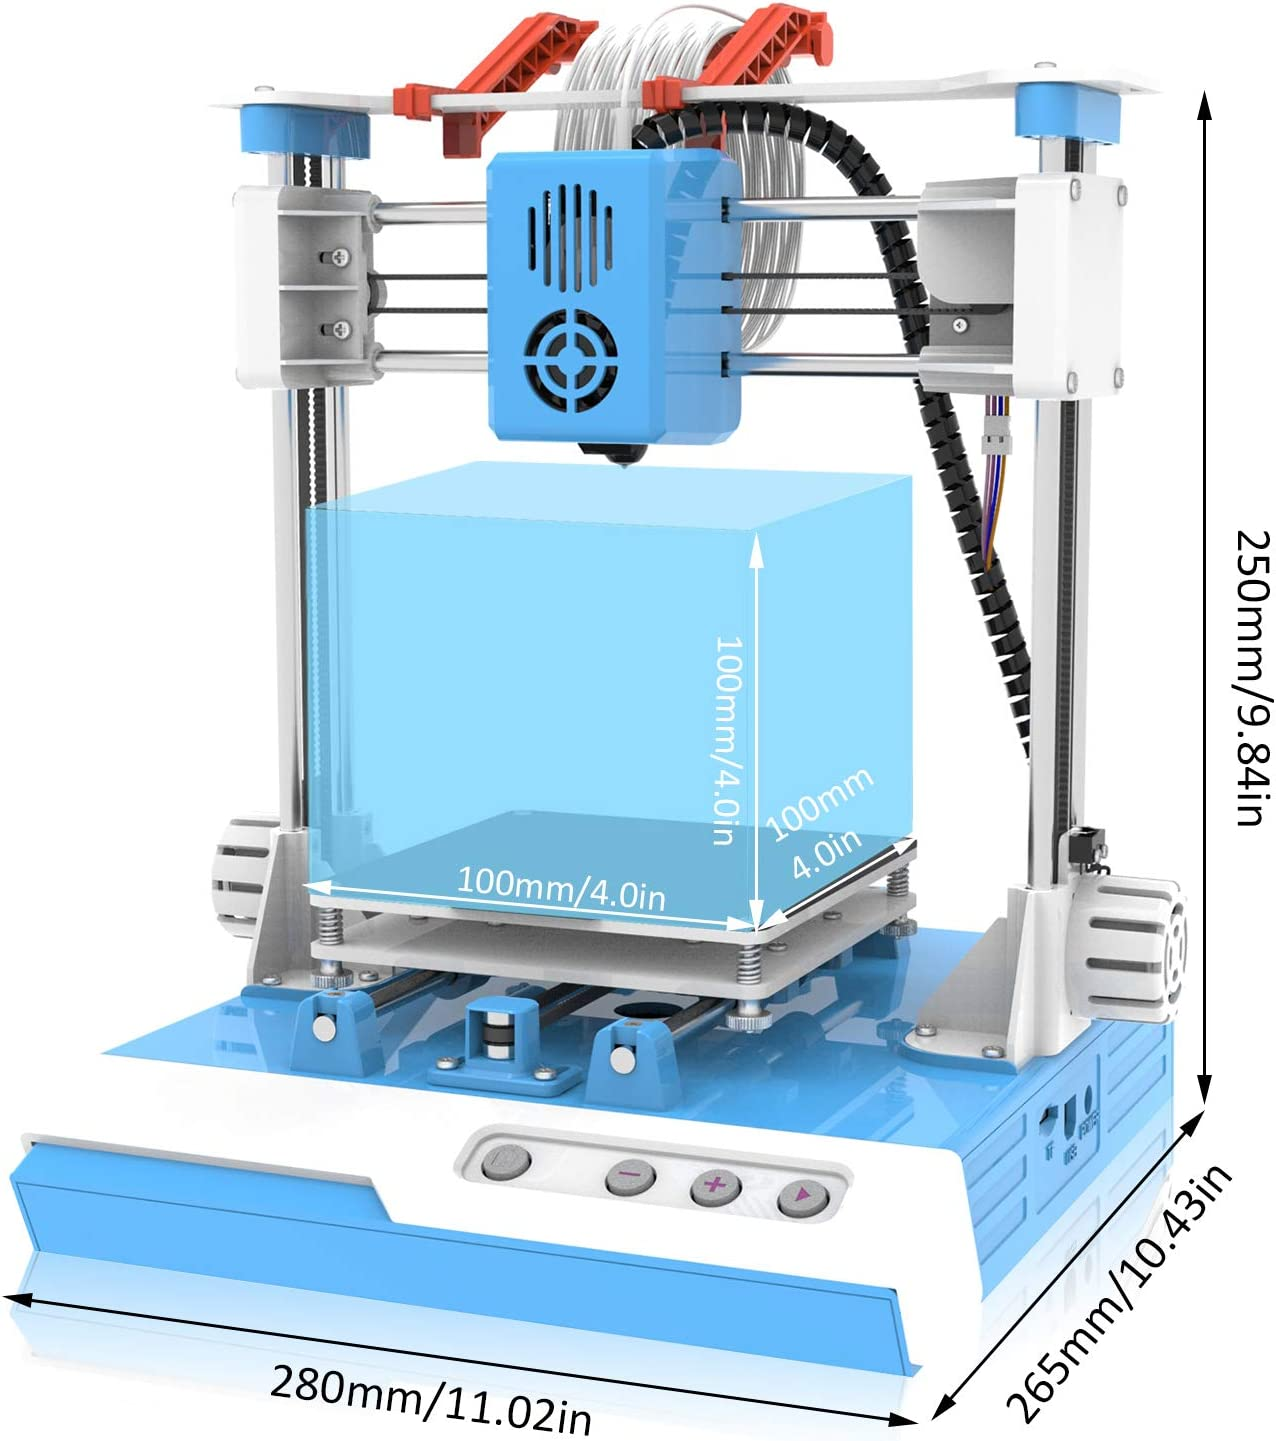 Mini 3D Printer for Beginners, Building Size 100 X 100 X 100MM Portable Desktop with 10M 1.75Mm PLA Filament, Magnetic Removable Plate (Blue)